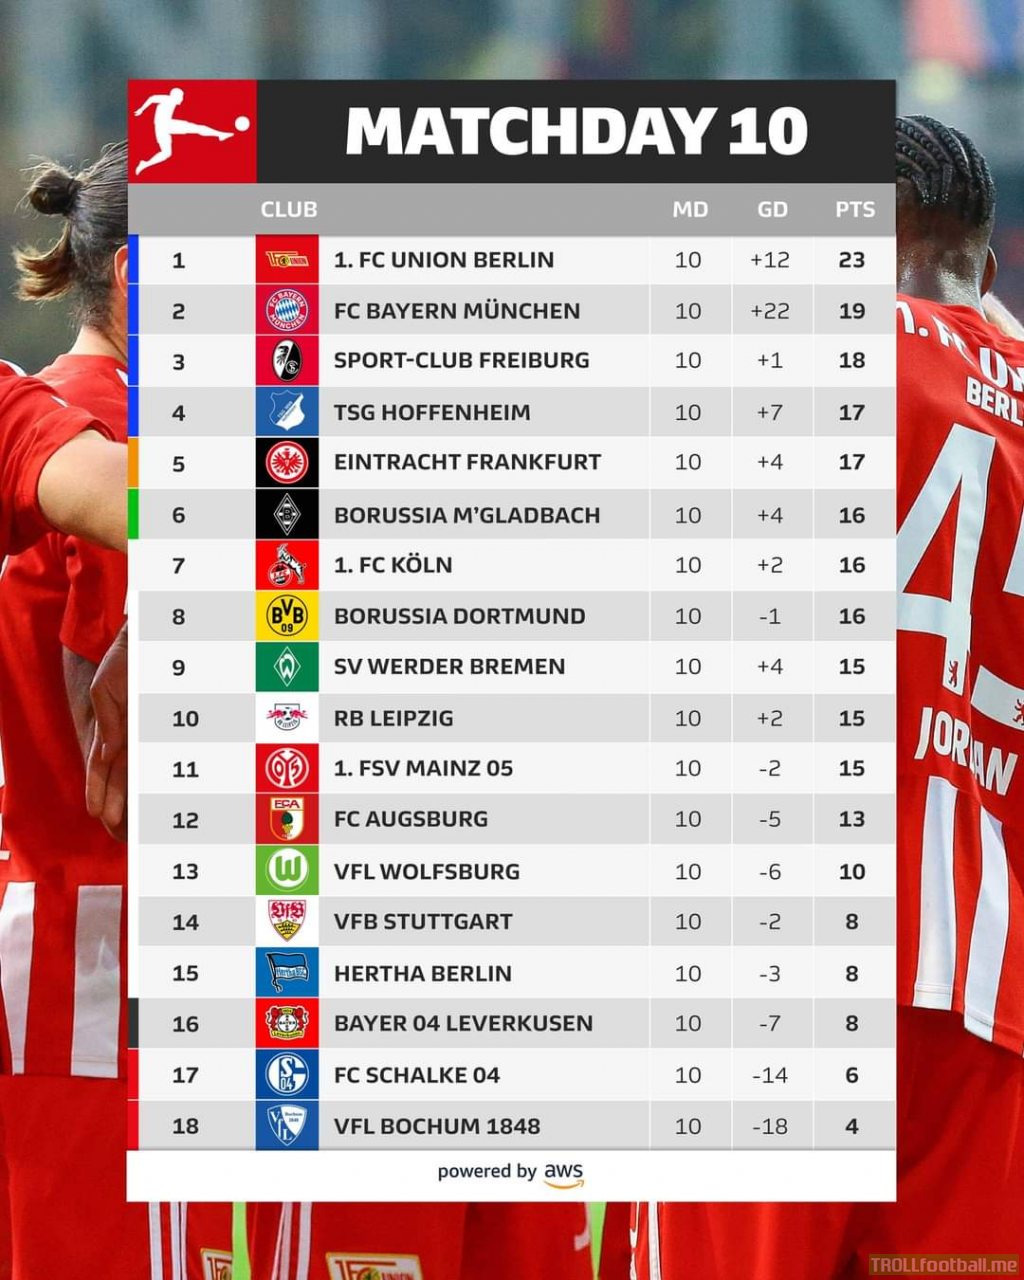 Bundesliga after Matchday 10. Union Berlin 4 points in front of Bayern. BVB is 8th. Schalke in the relegation zone. Thoughts?